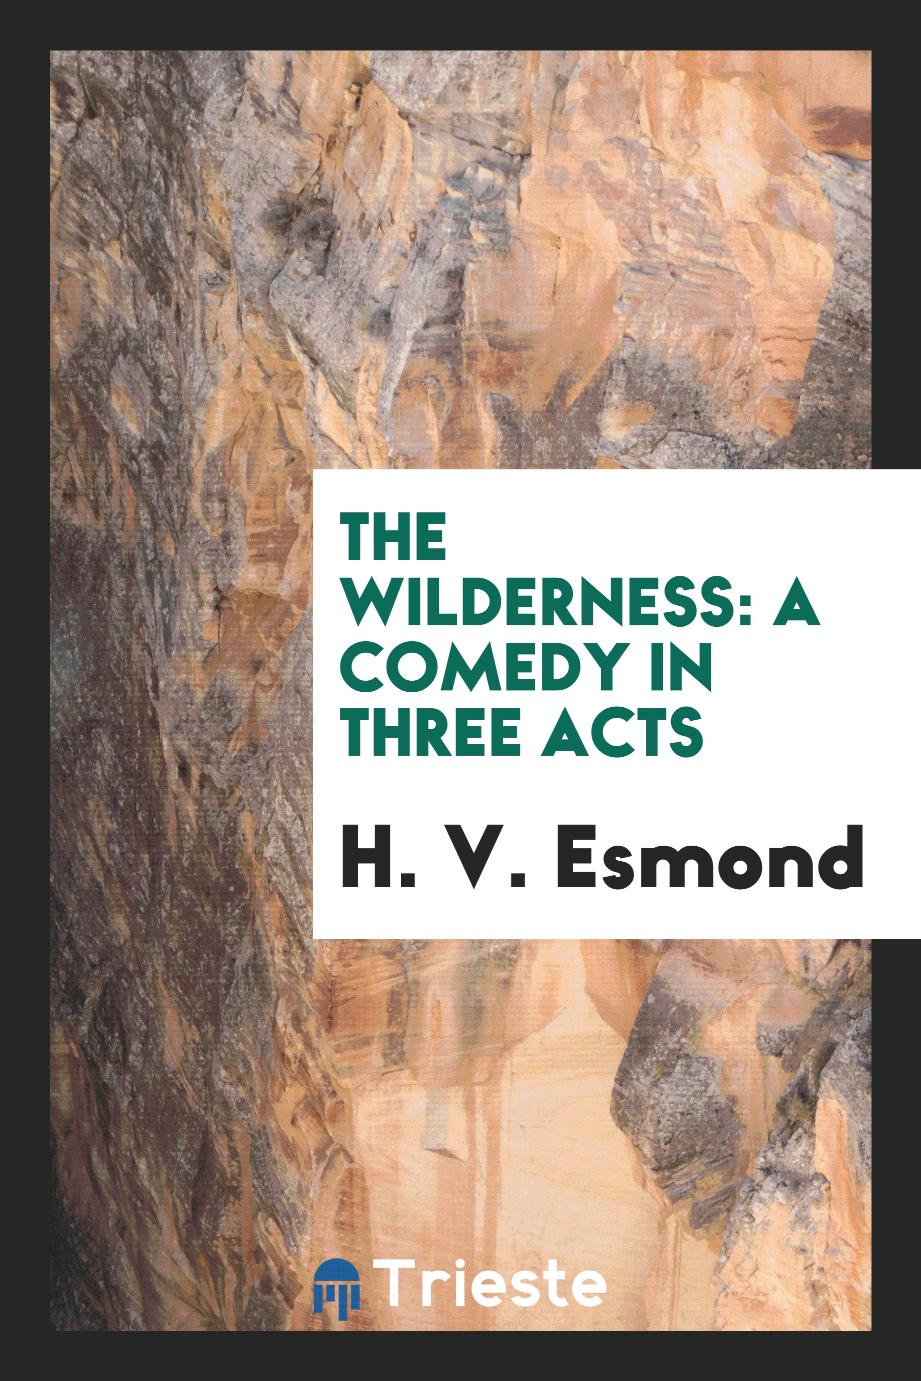 The Wilderness: A Comedy in Three Acts